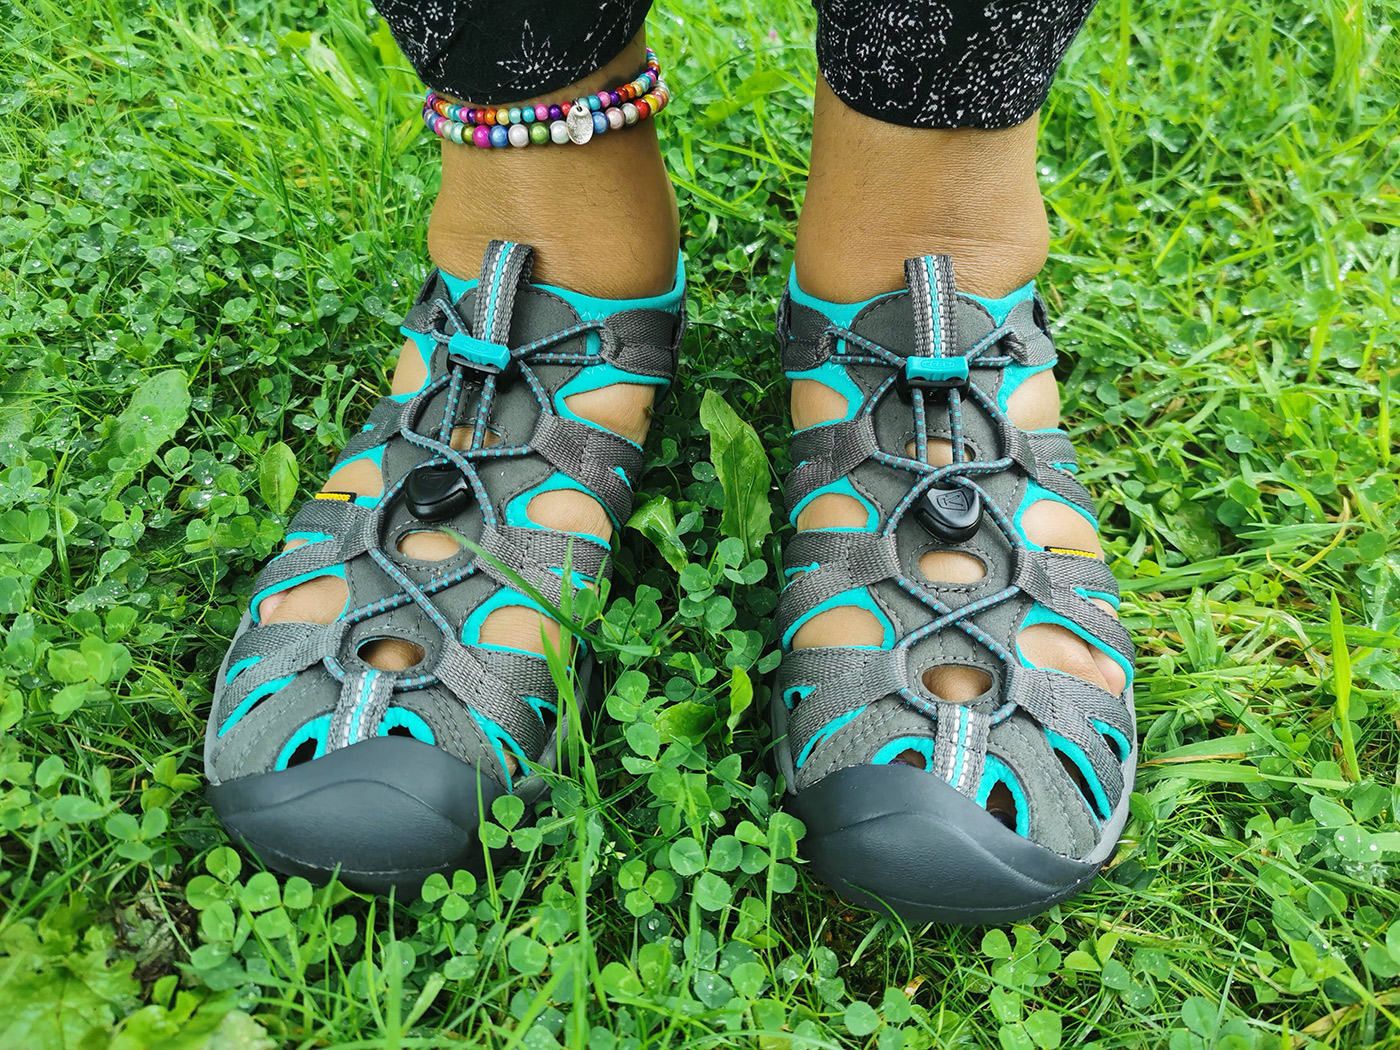 GEAR | KEEN Whisper Ladies Water Sandals Review | Camping Blog Camping with Style Travel, Outdoors & Blog